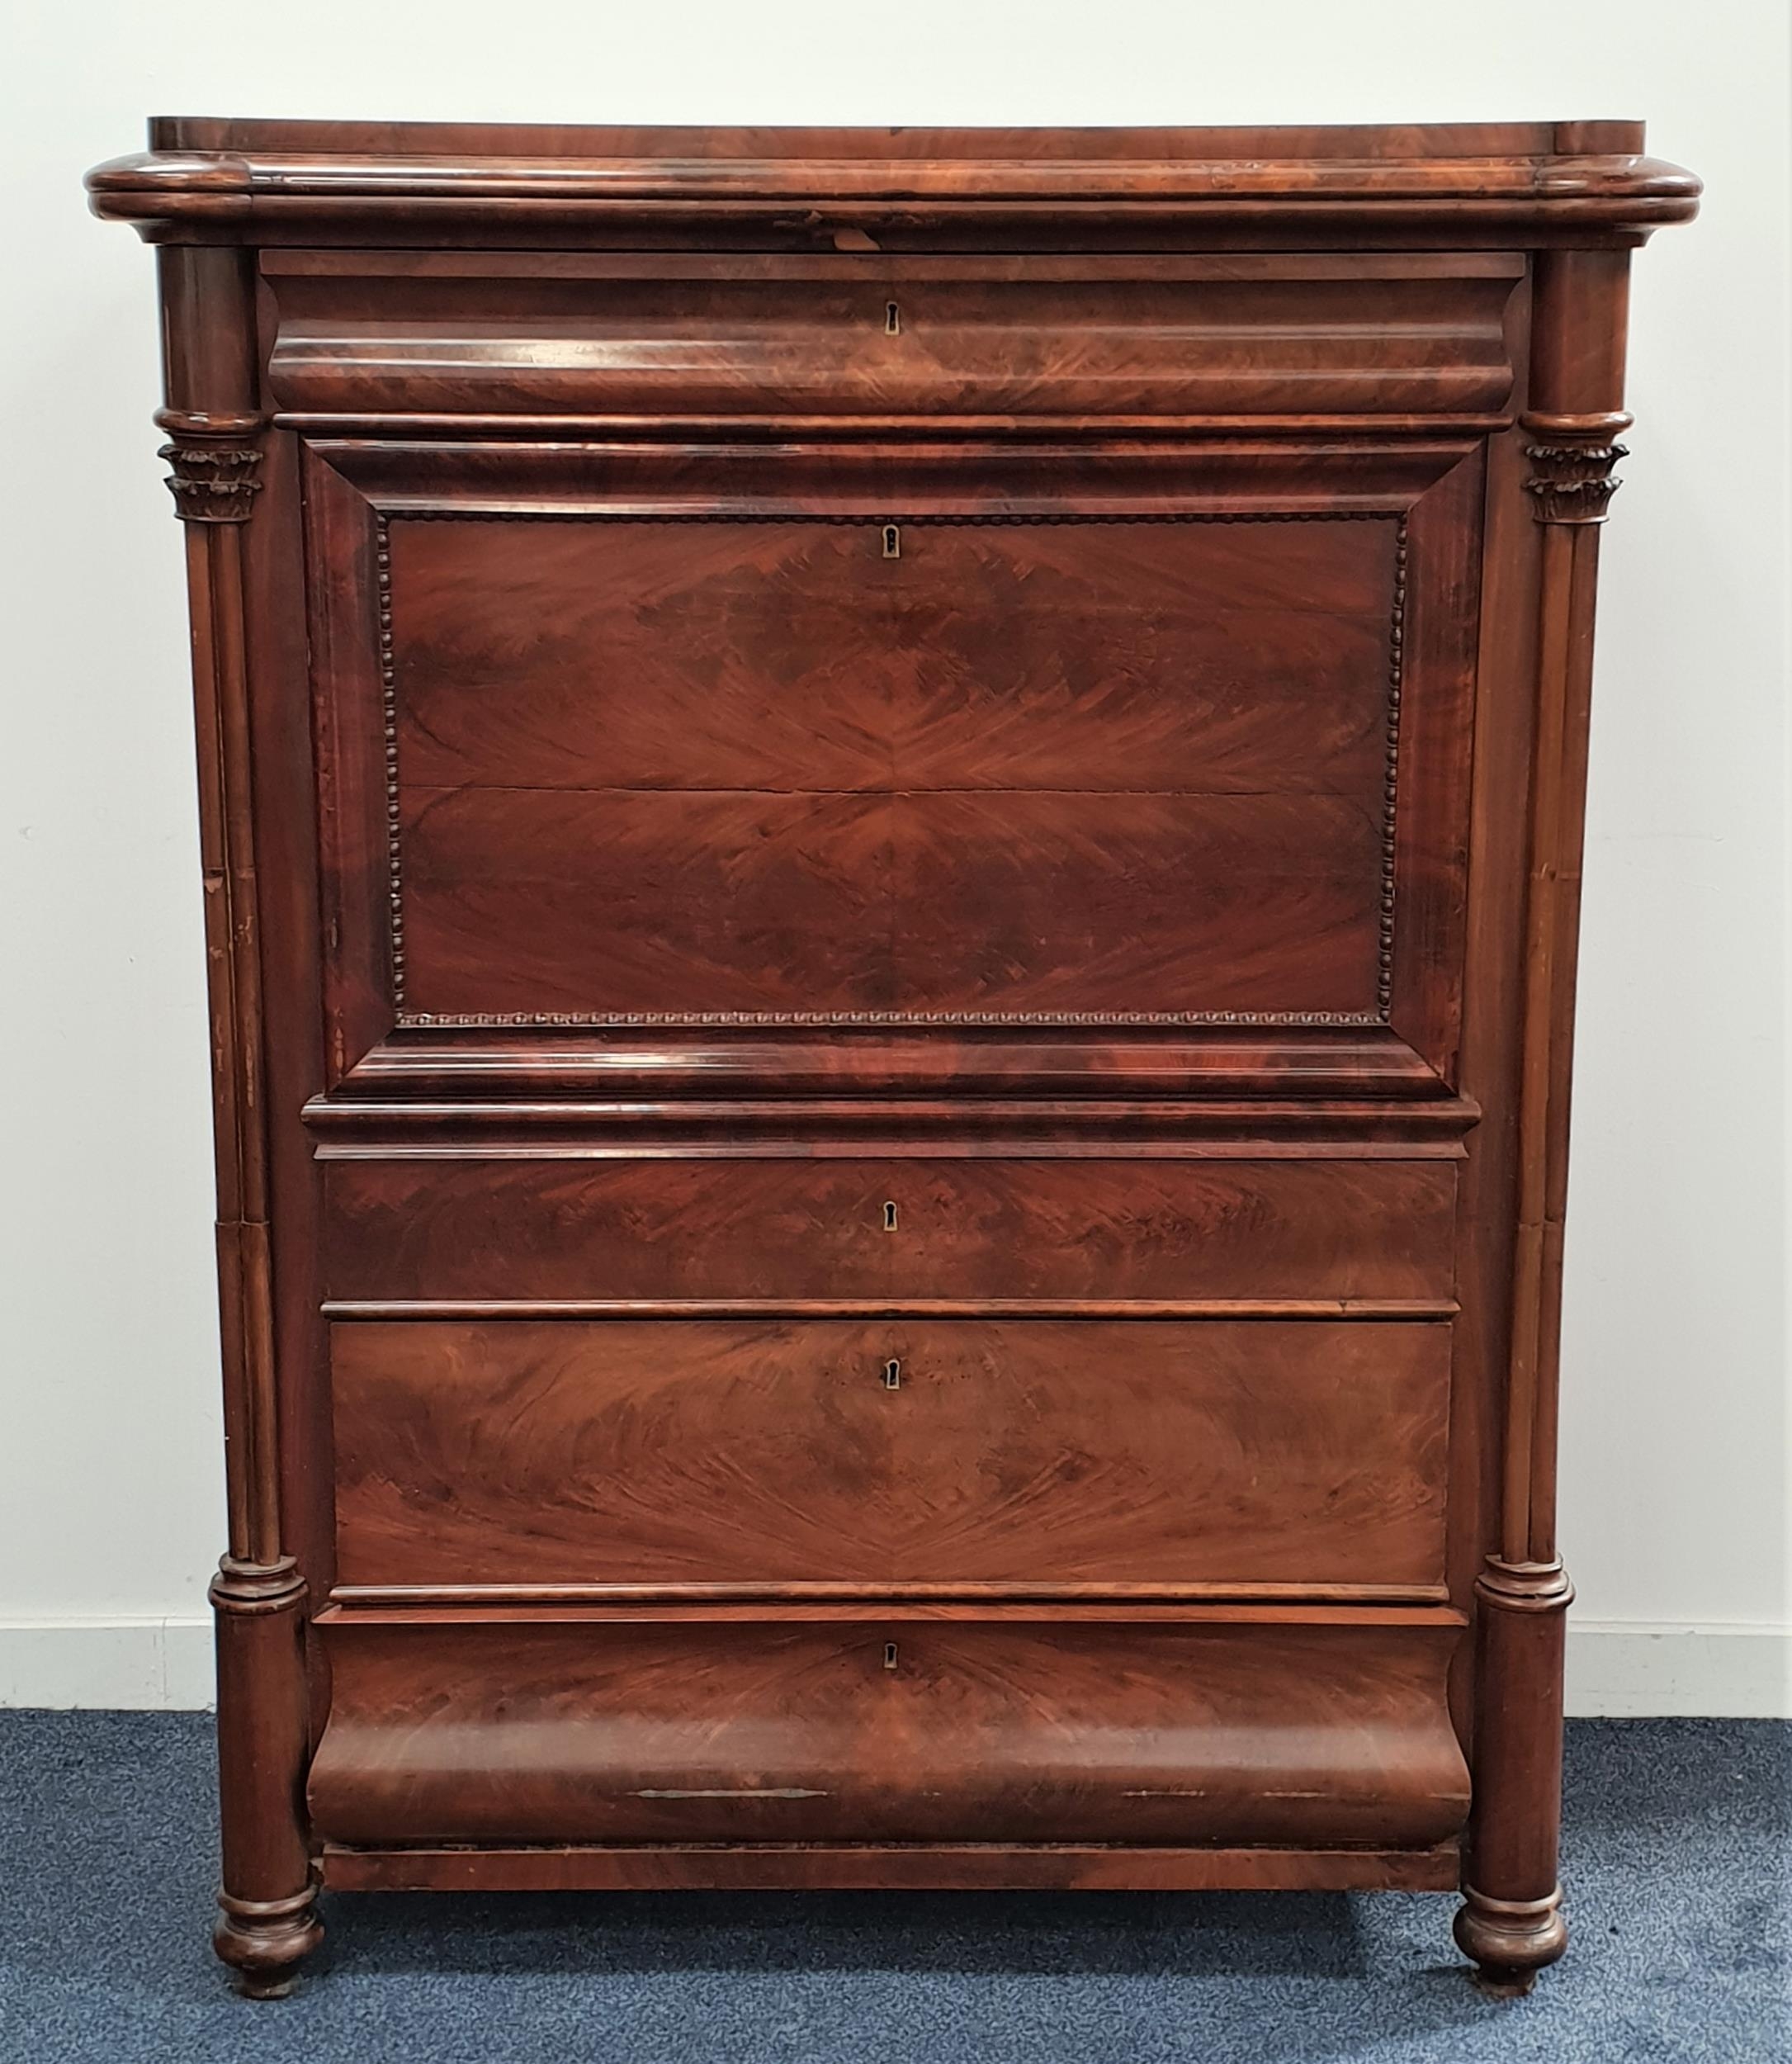 WILLIAM IV MAHOGANY ESCRITOIRE with a moulded top above a cushion frieze drawer flanked by turned - Image 2 of 2